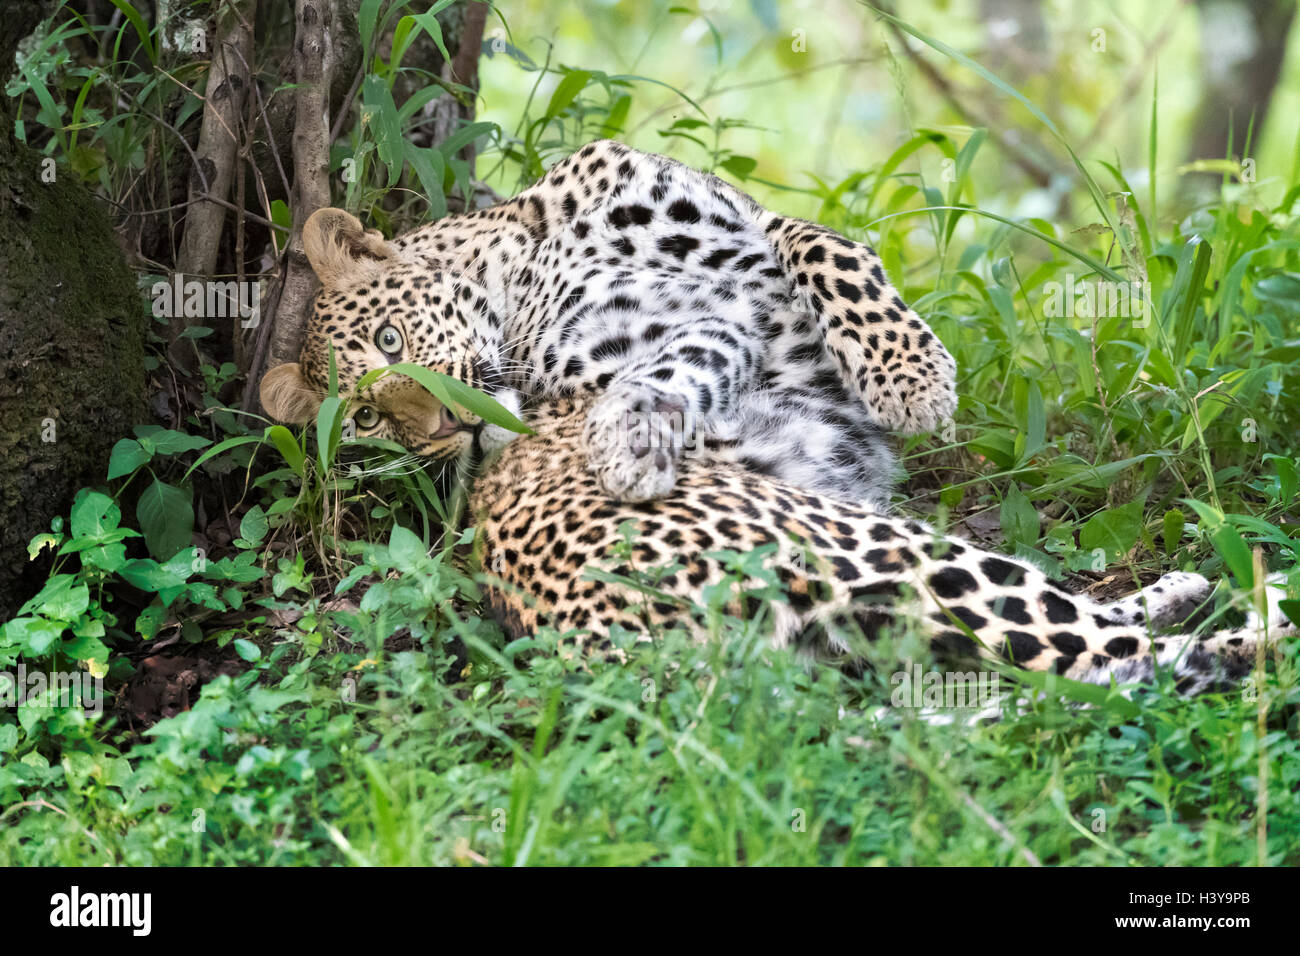 African Leopard (Panthera pardus) lying down in forest, playing, Masai Mara national reserve, Kenya. Stock Photo